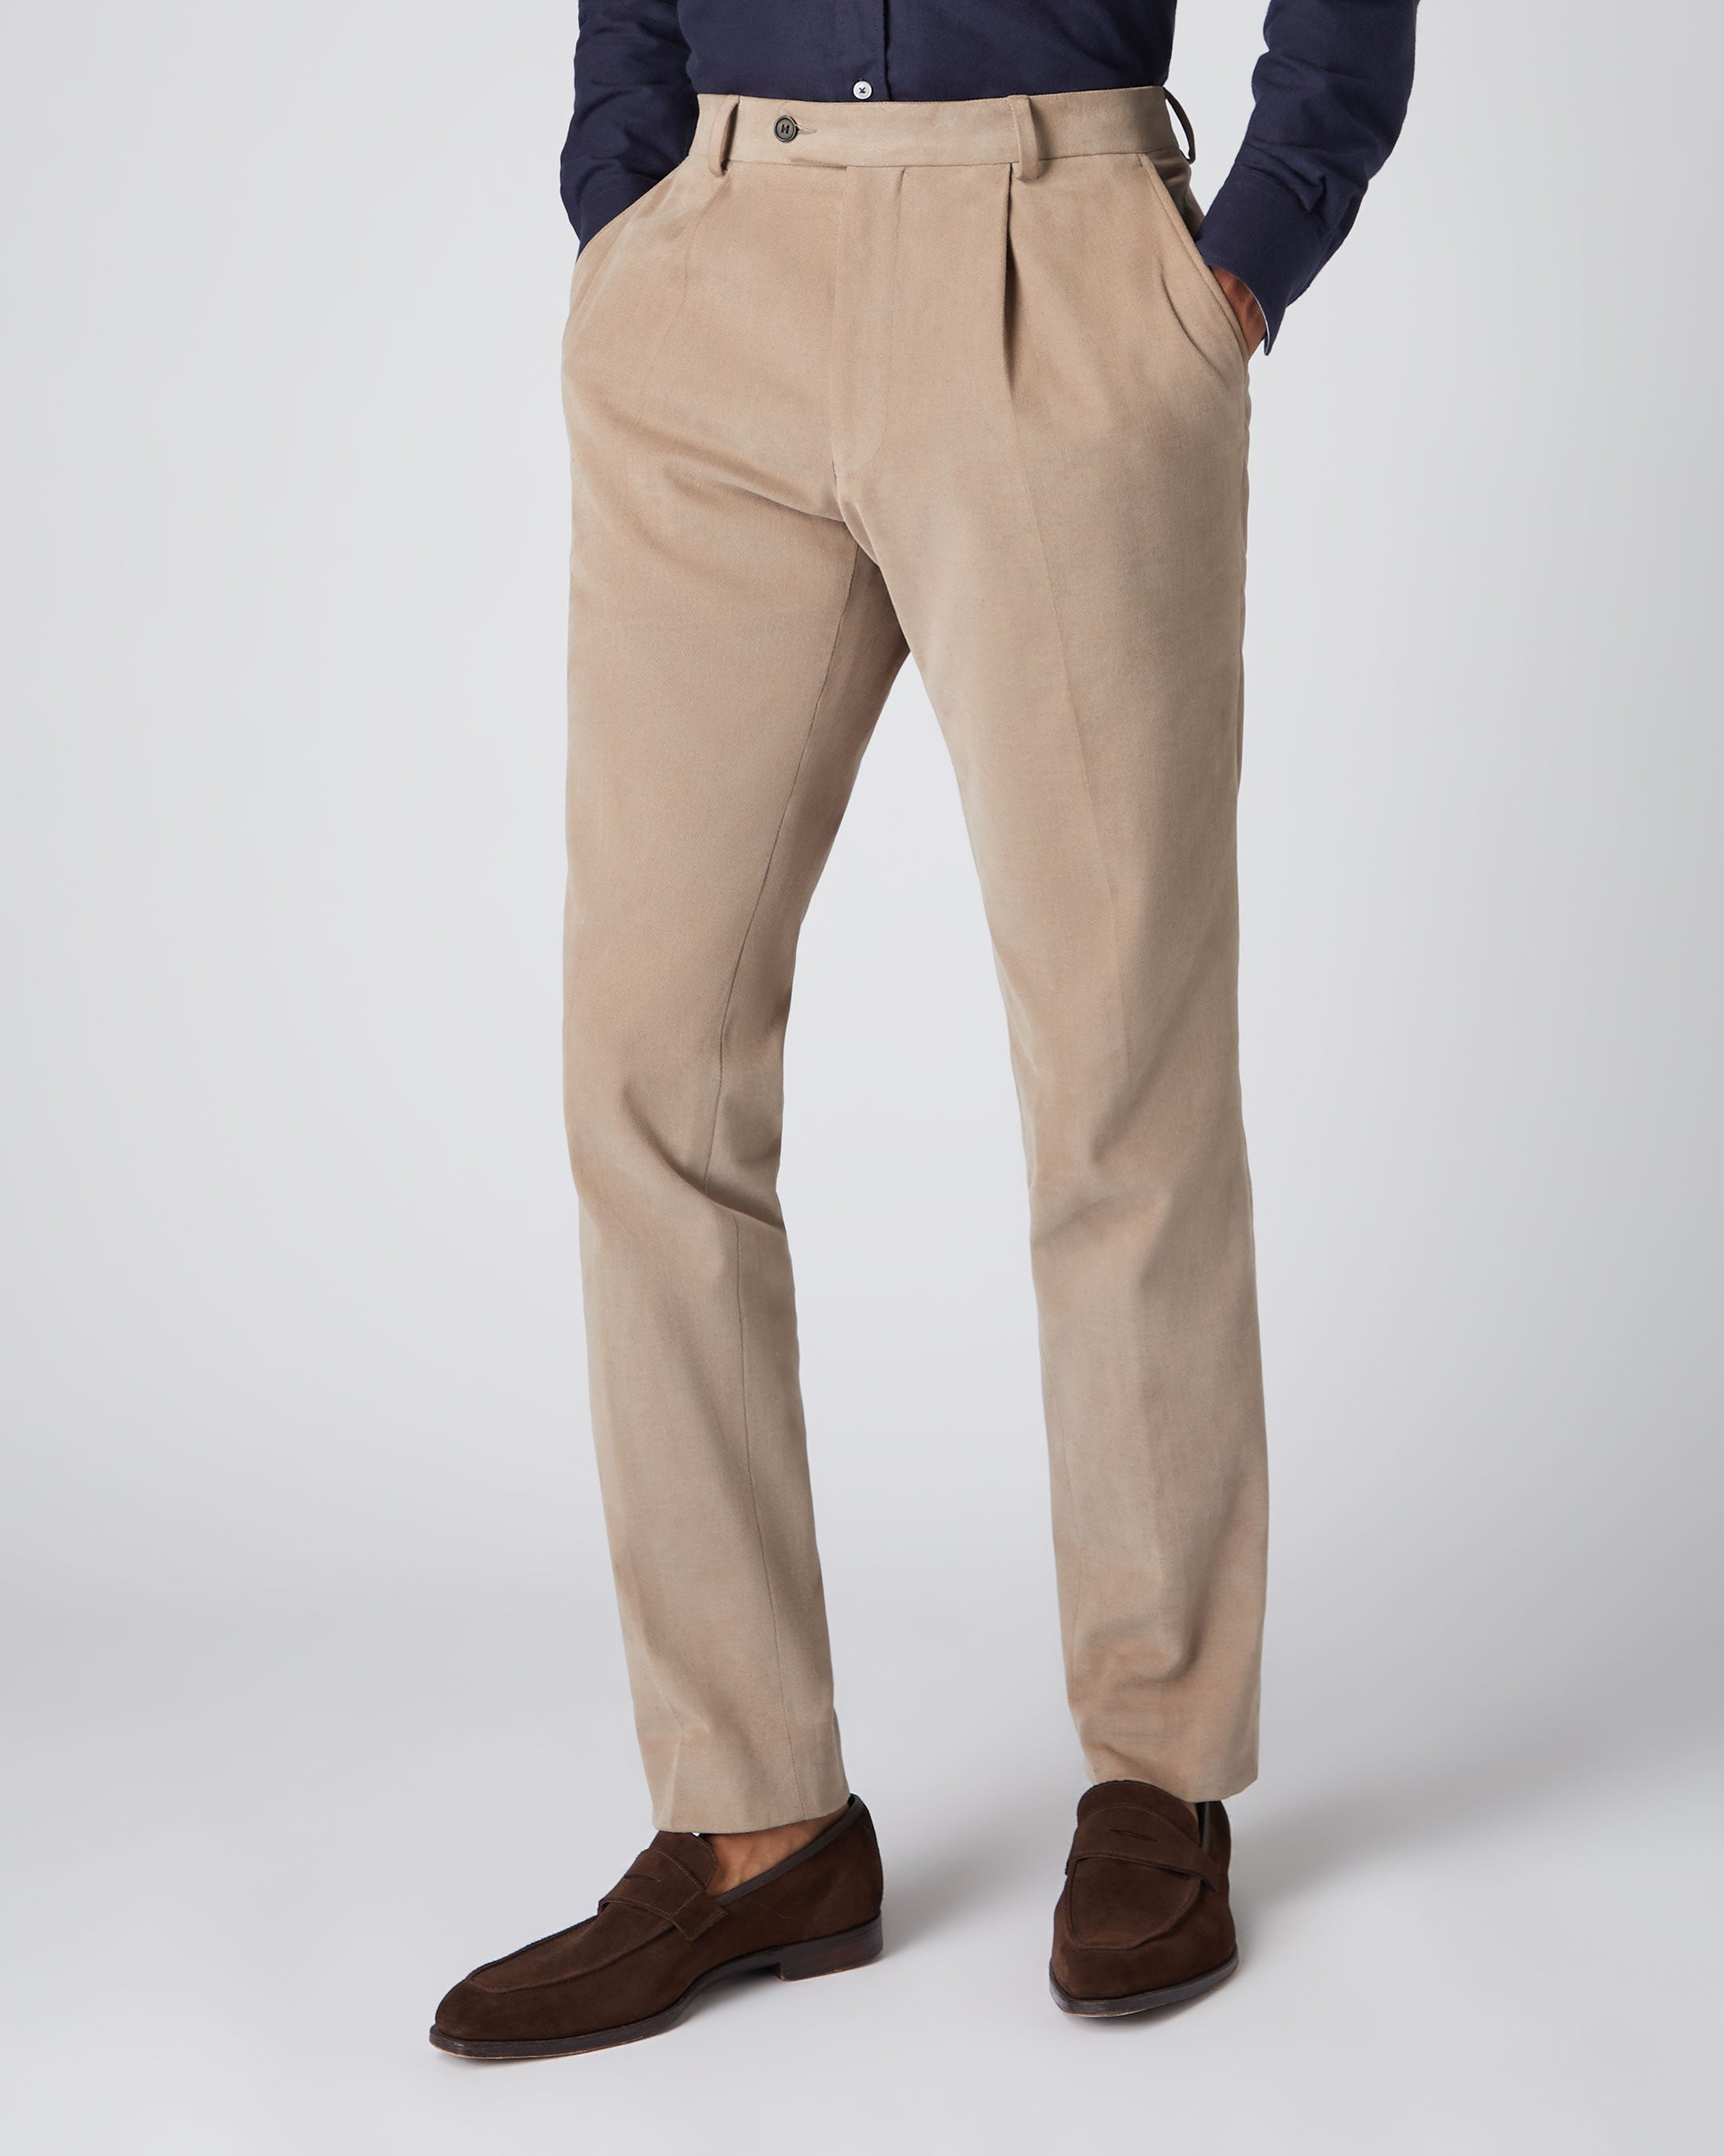 Slim Fit Taupe & Brown Houndstooth Trousers | Buy Online at Moss